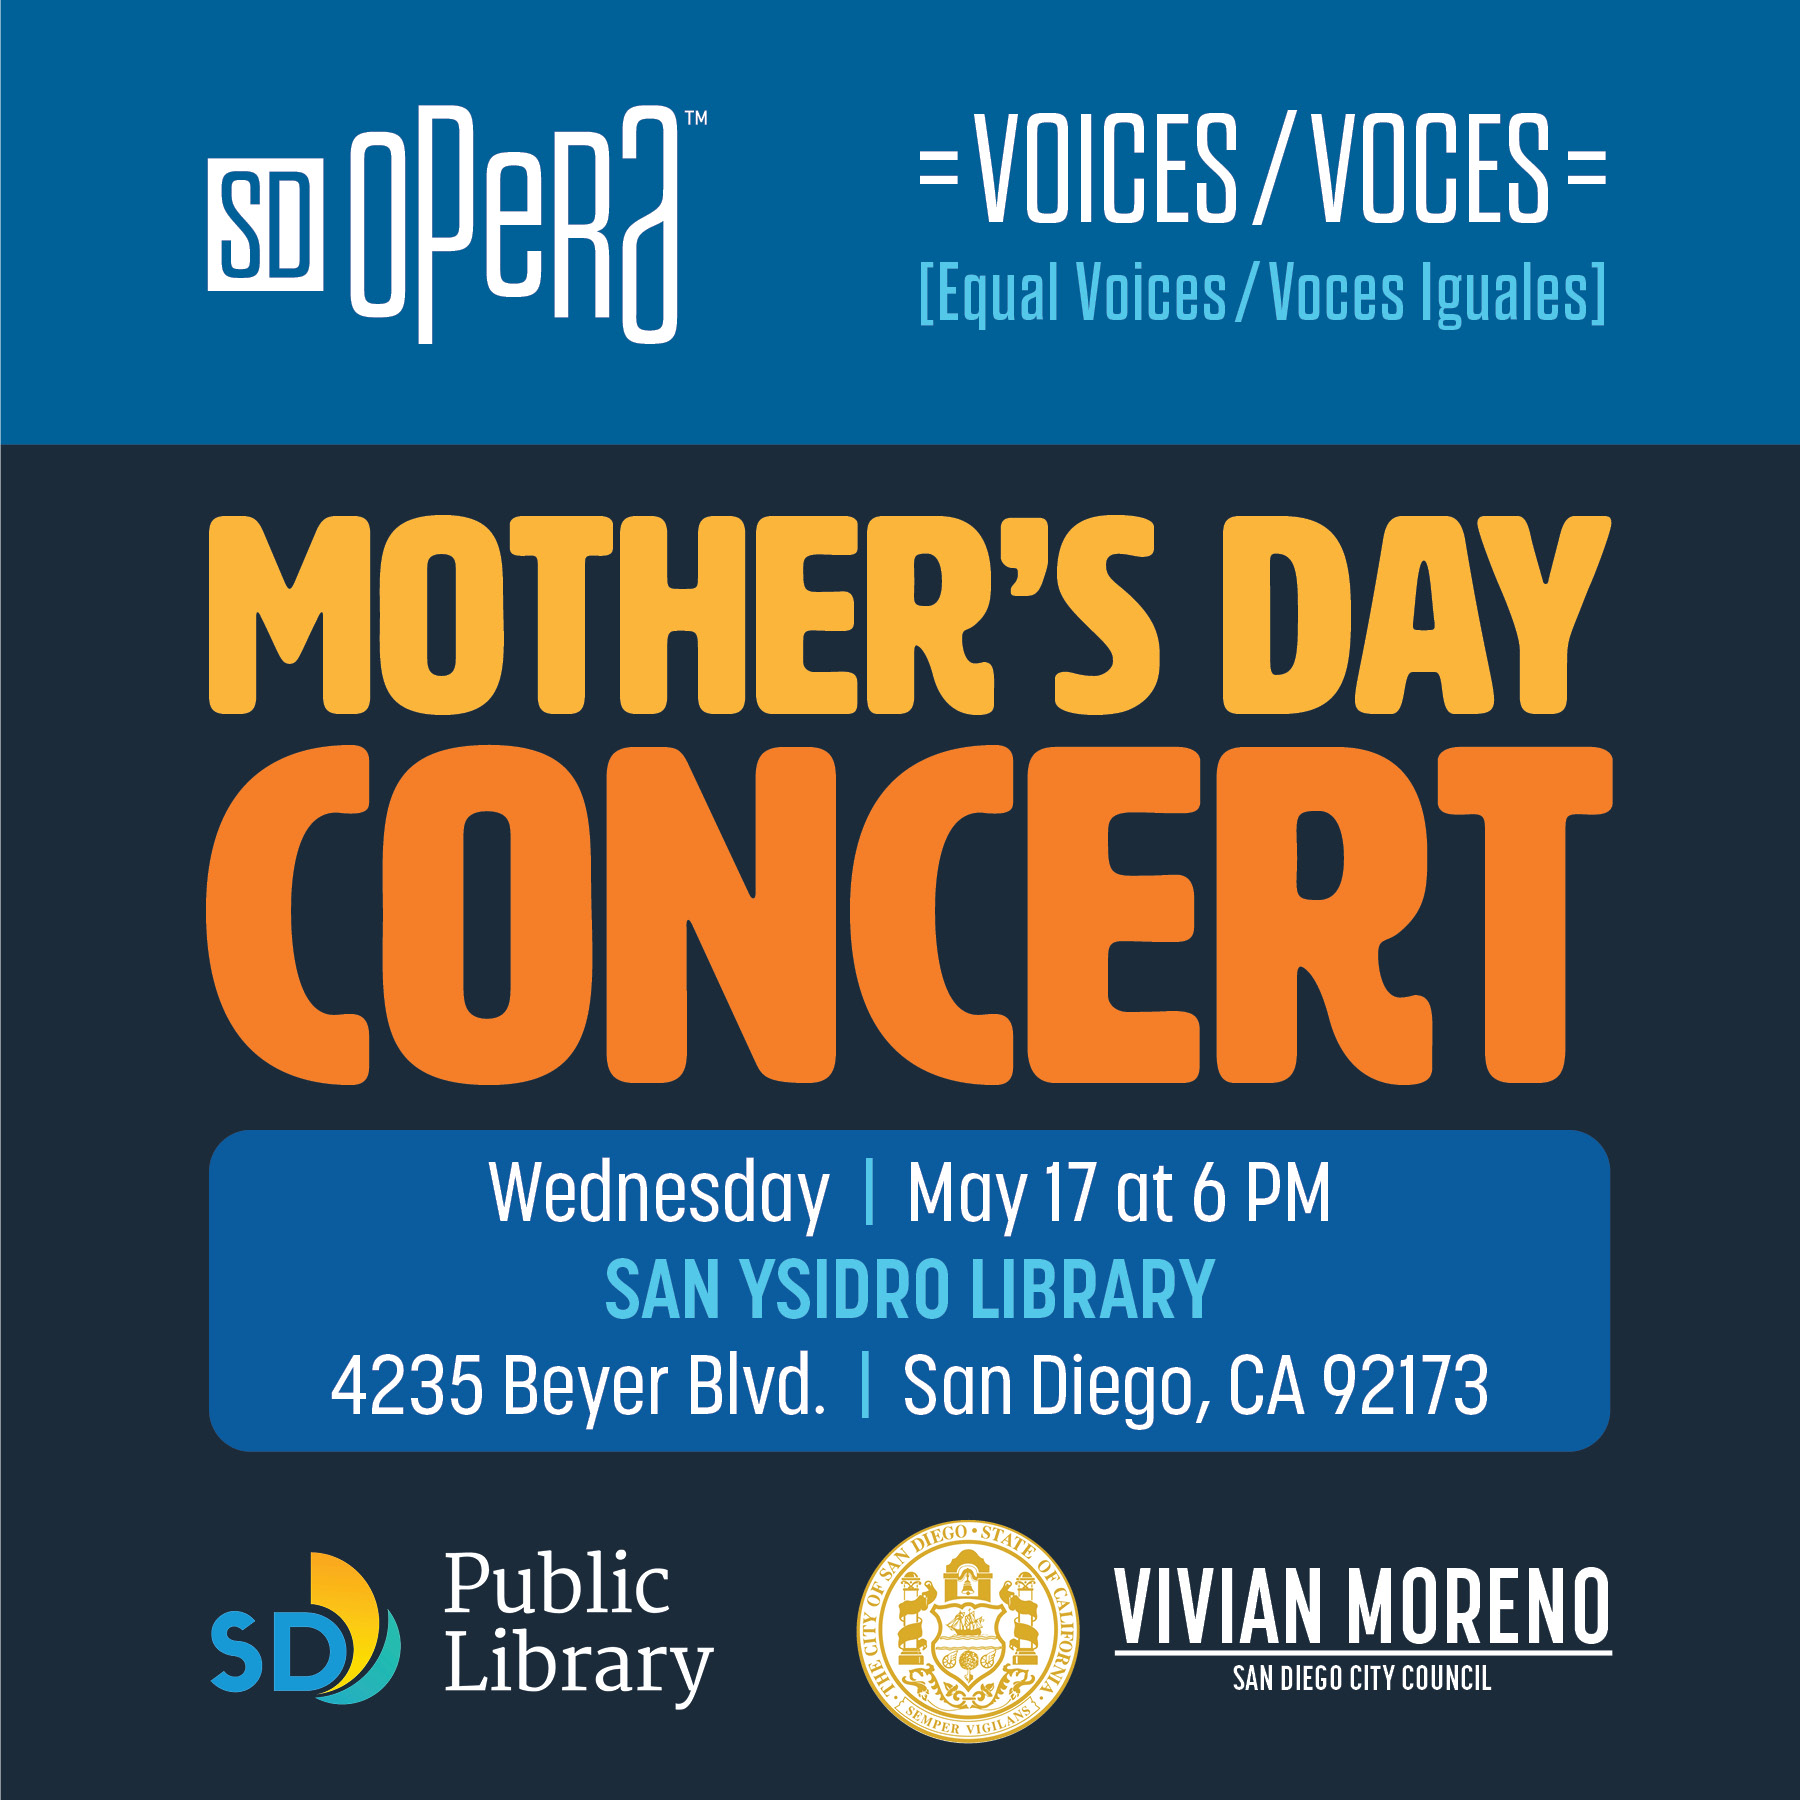 Mother's Day concert flyer.